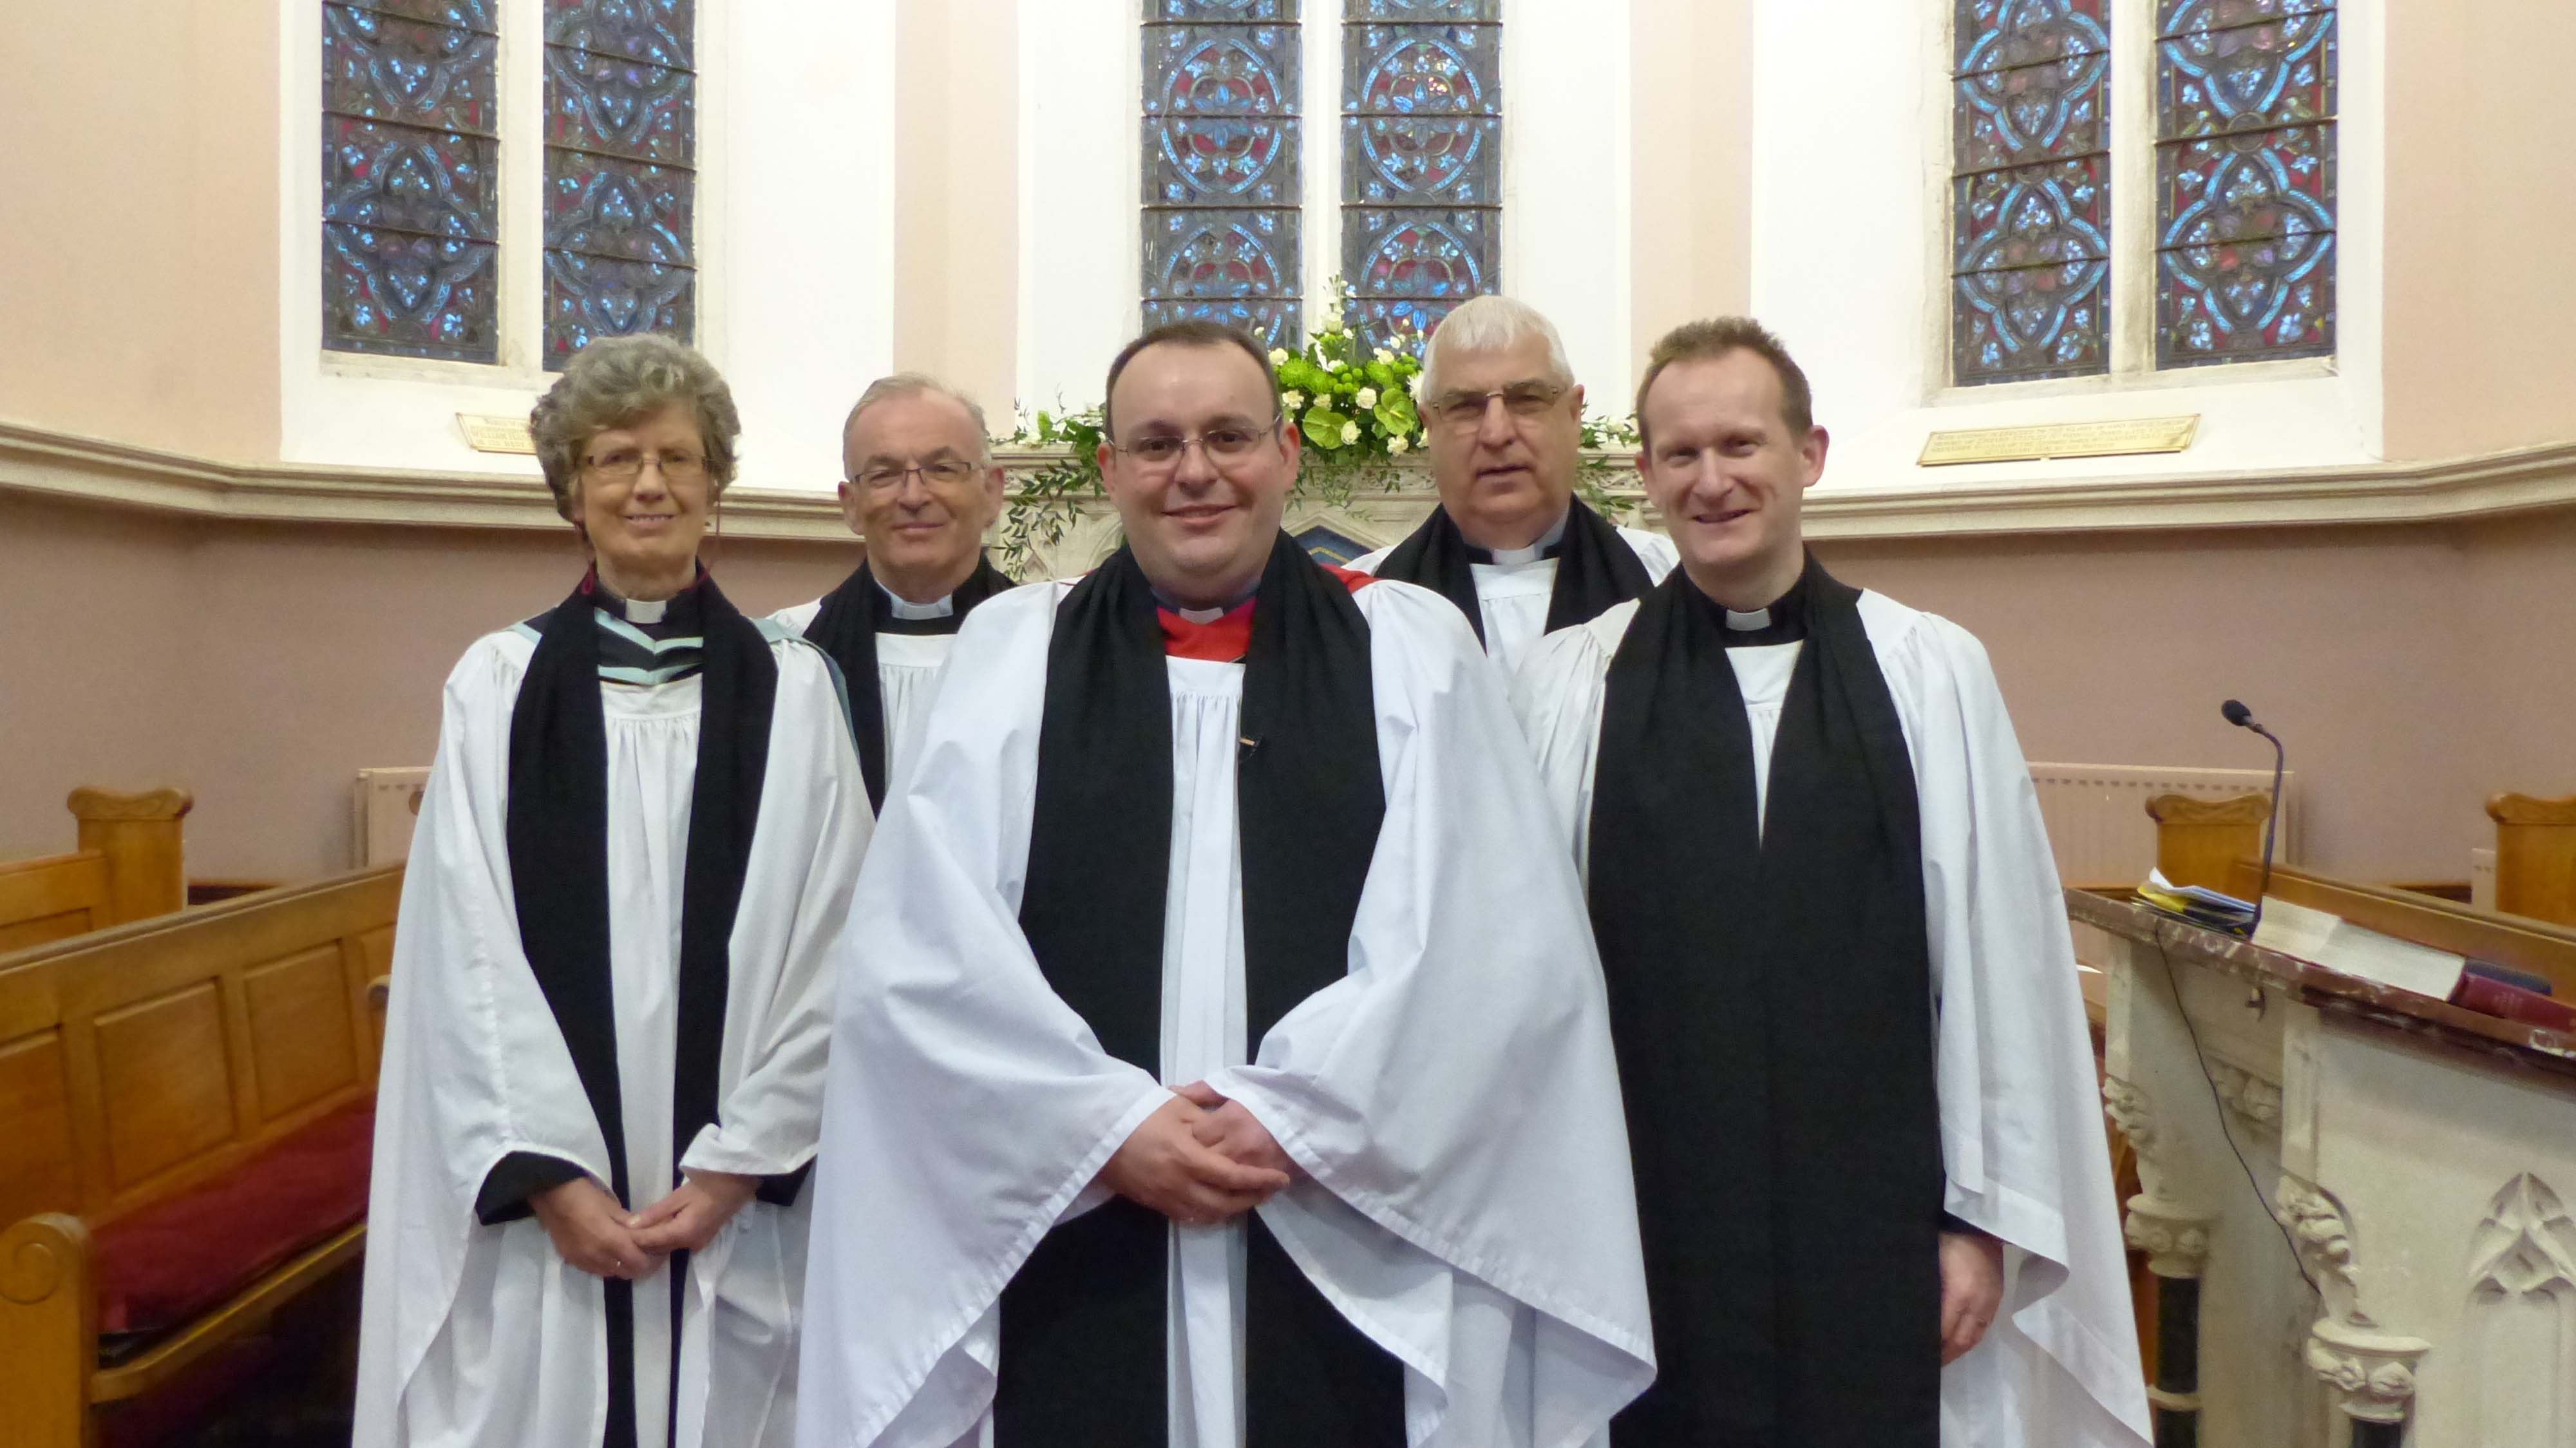 Mark with his year group from college – the Revd Amelia McWilliams, the Revd Ivan Dungan, the Revd William Anderson, and the Revd Adrian Halligan.